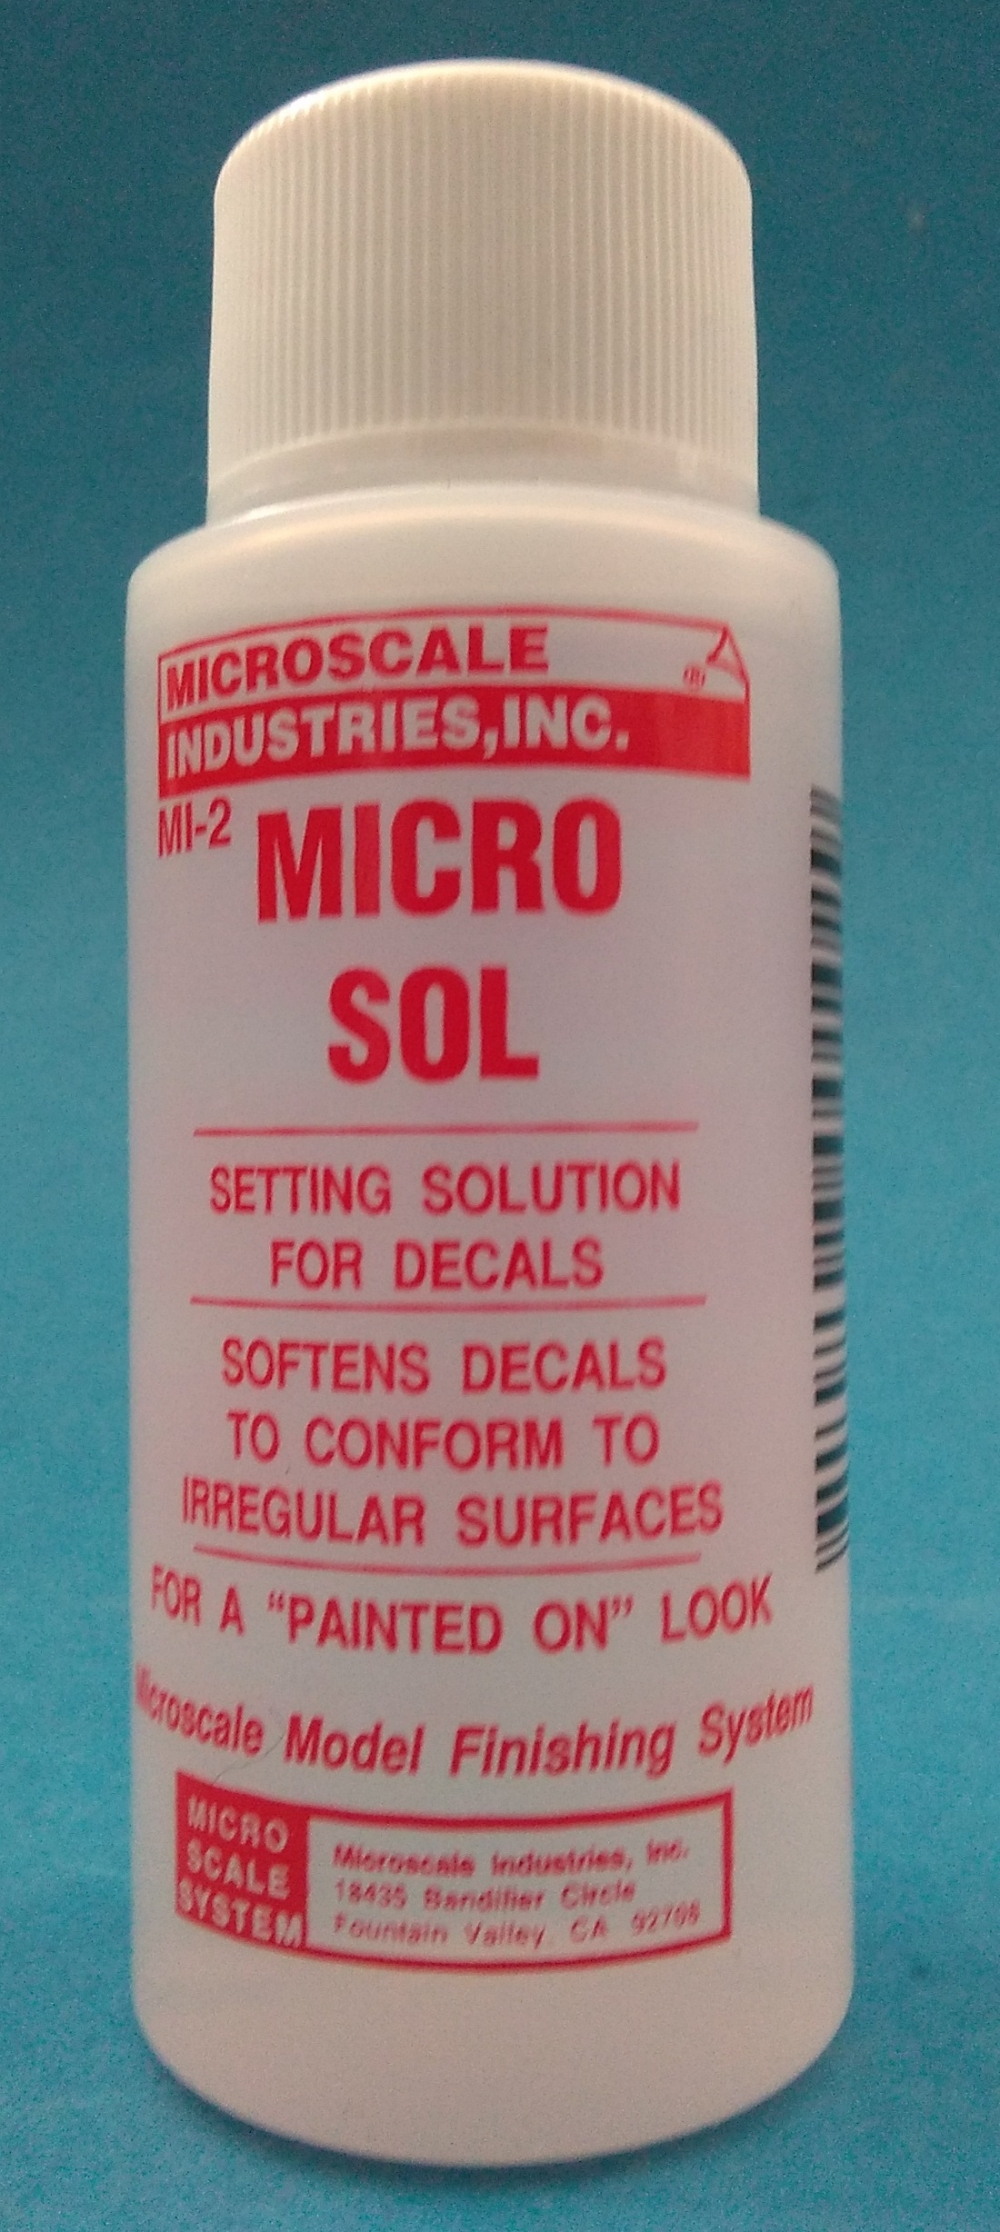 MICRO SOL - Decal softners - Scale models